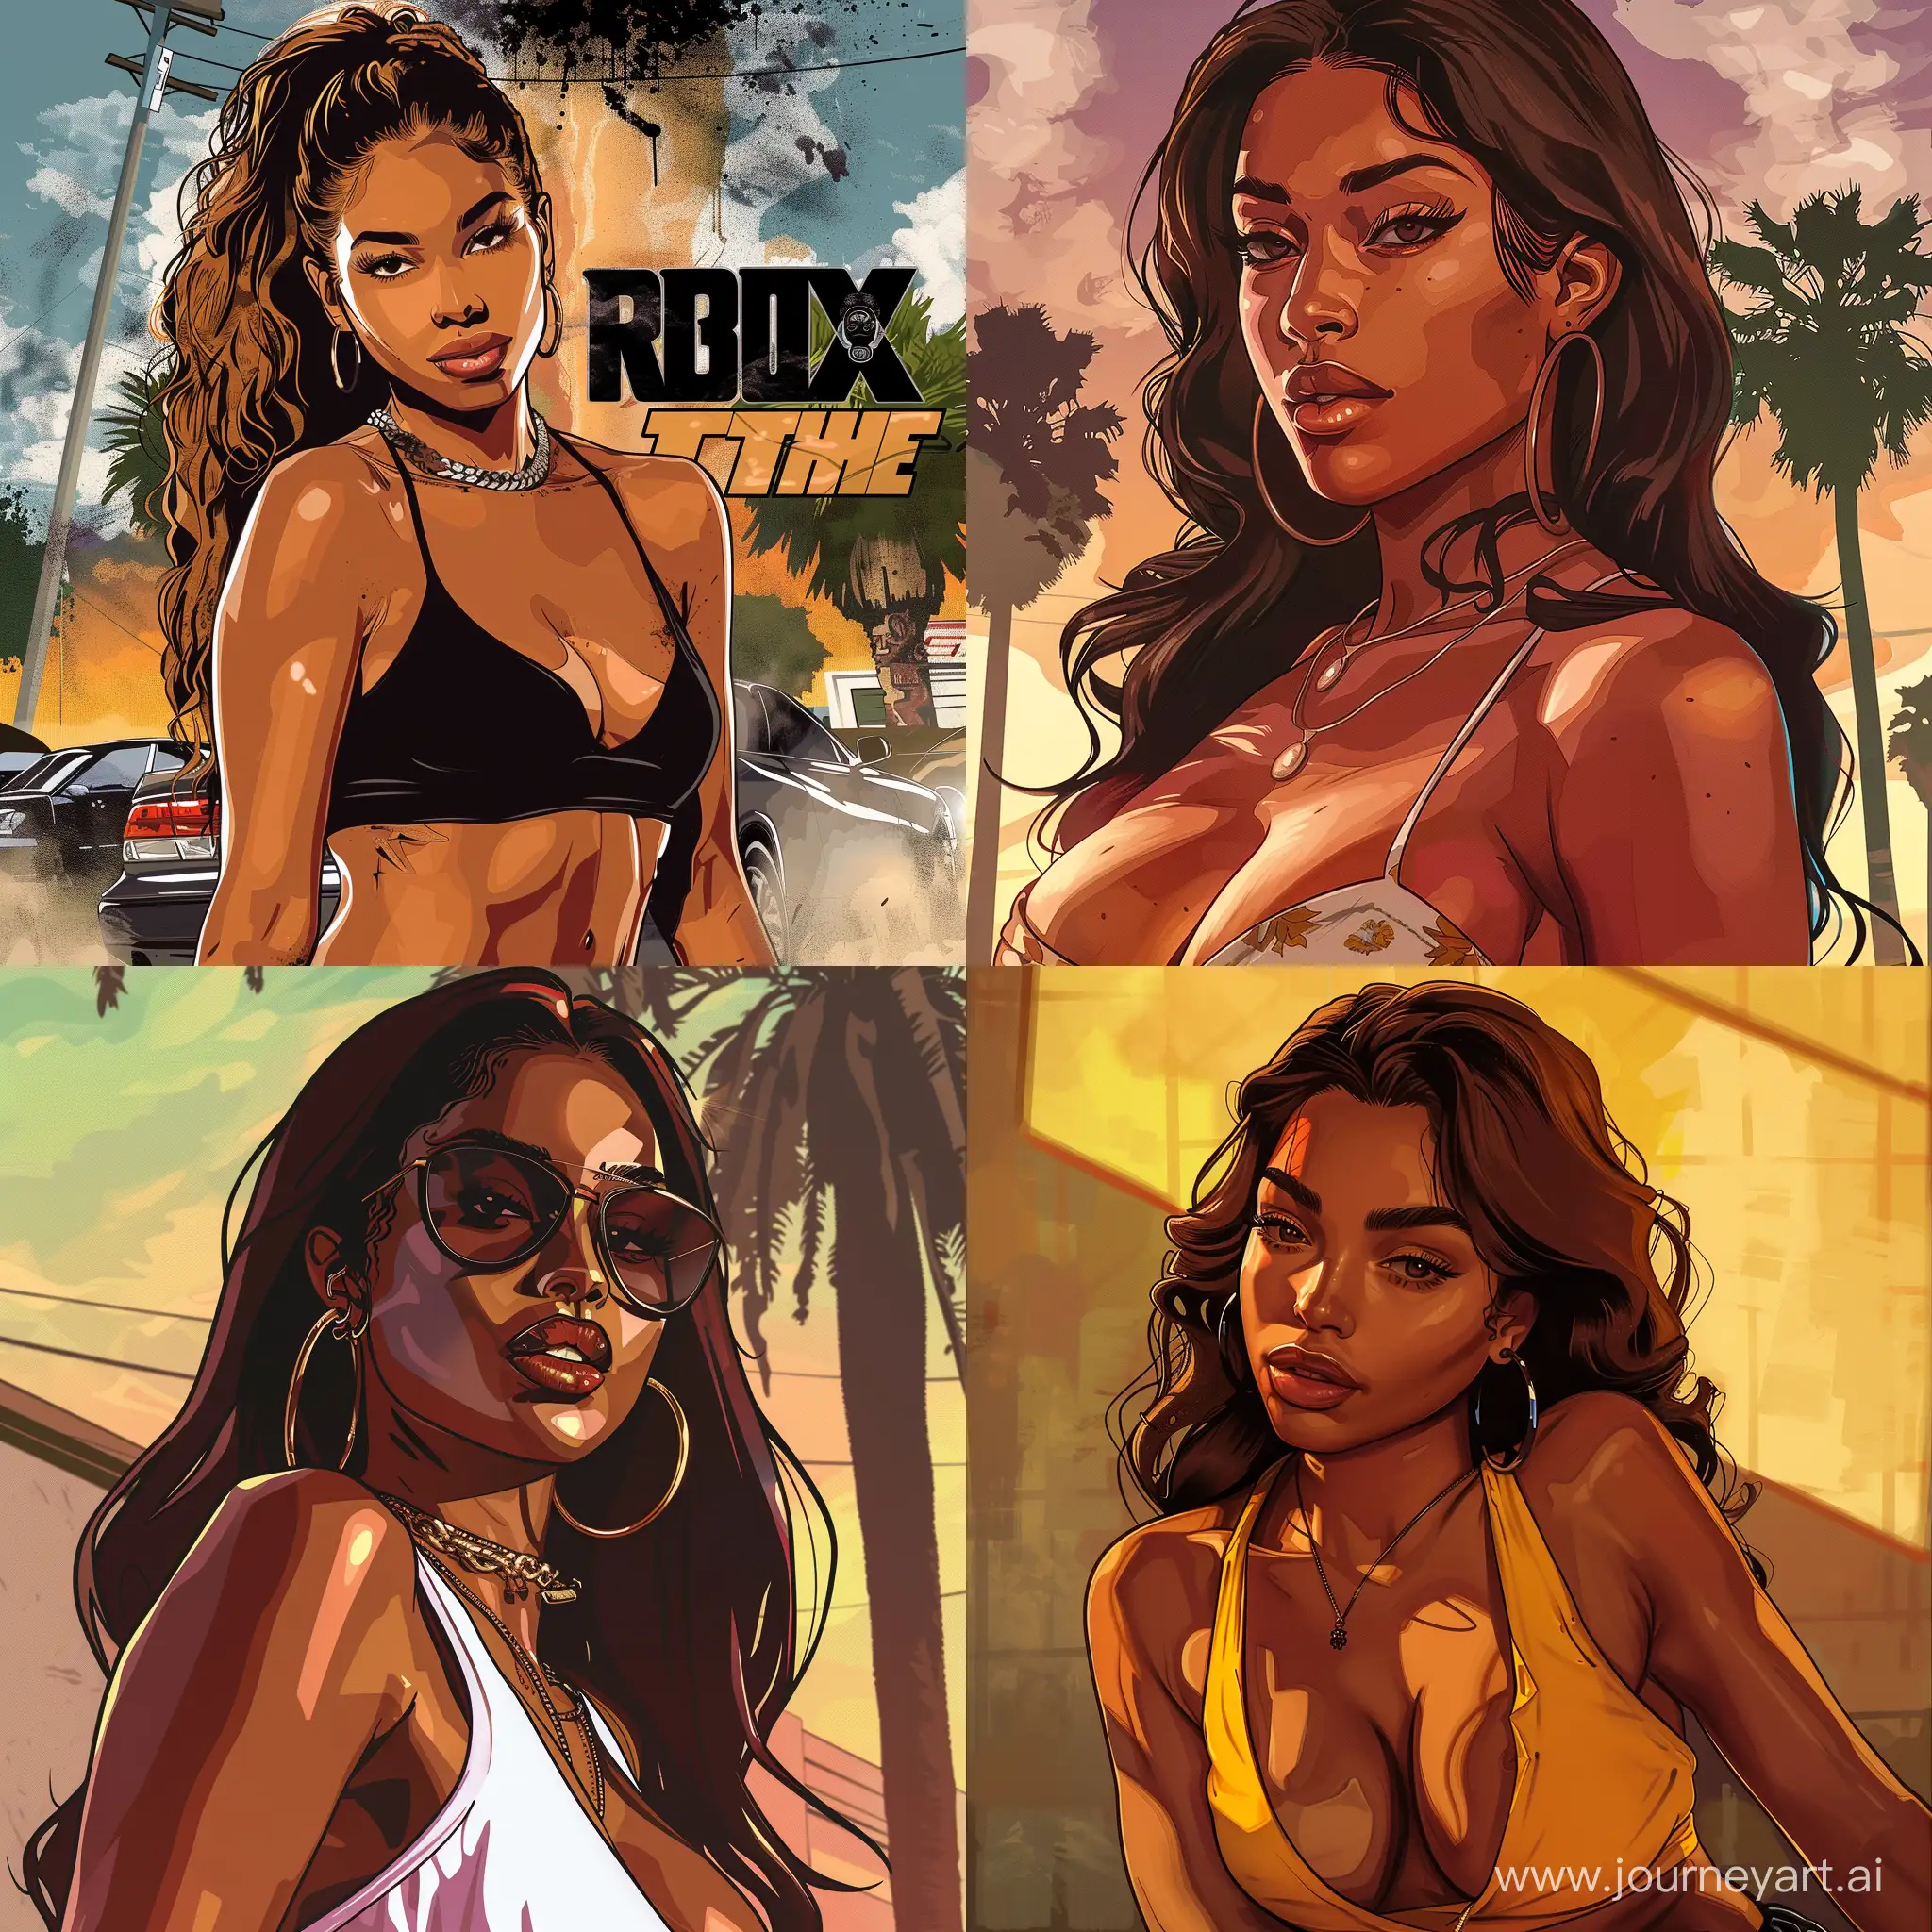 I'm creating an r&b event flyer and would like the background to be a sexy brown woman , in the style of grand theft auto artwork